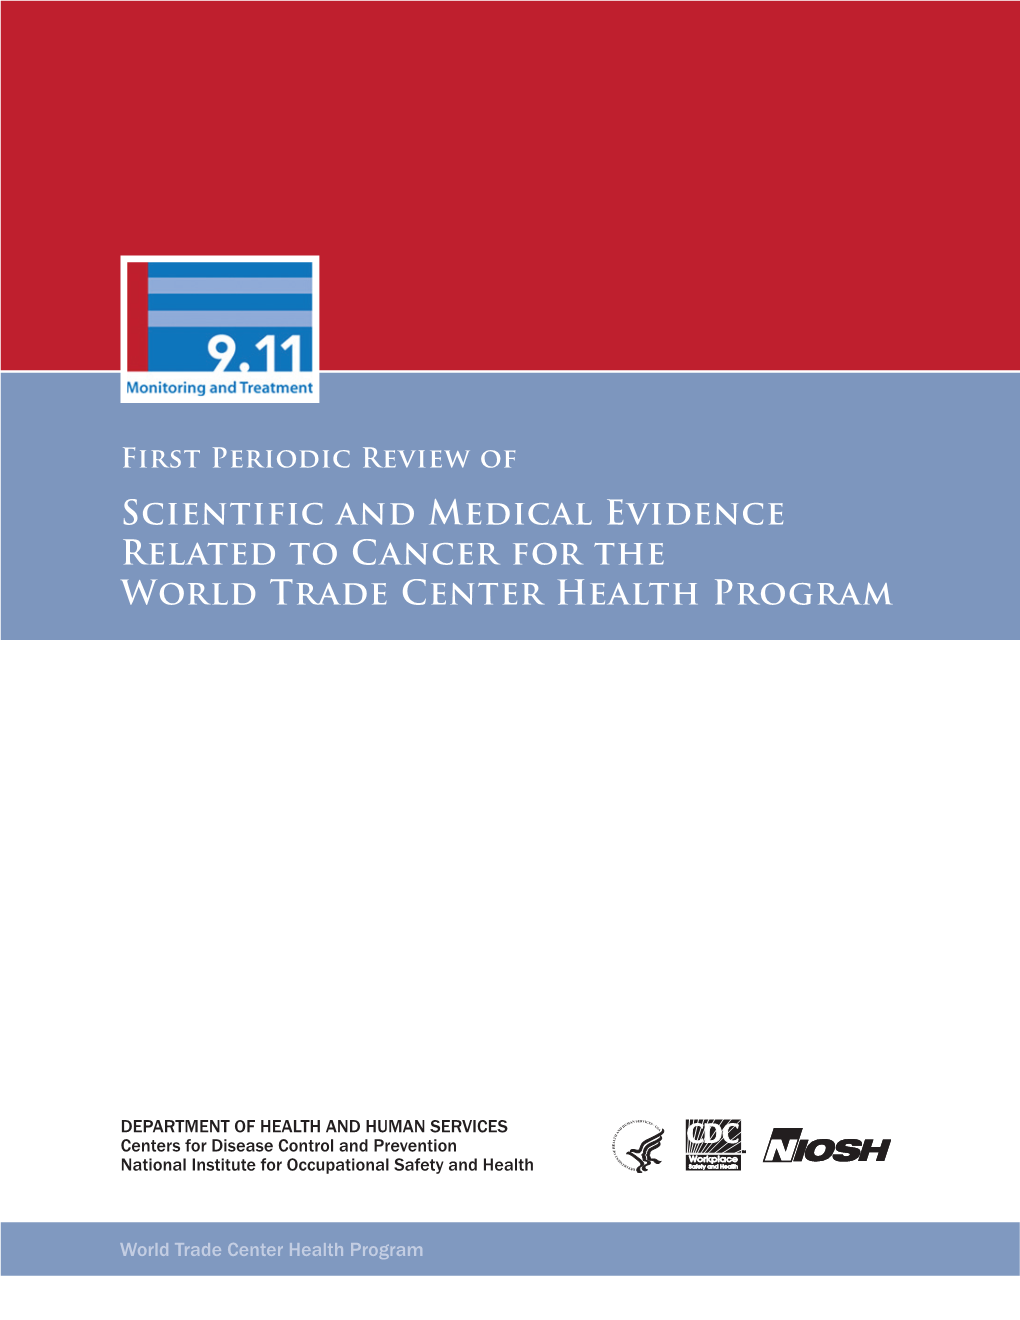 Scientific and Medical Evidence Related to Cancer for the World Trade Center Health Program